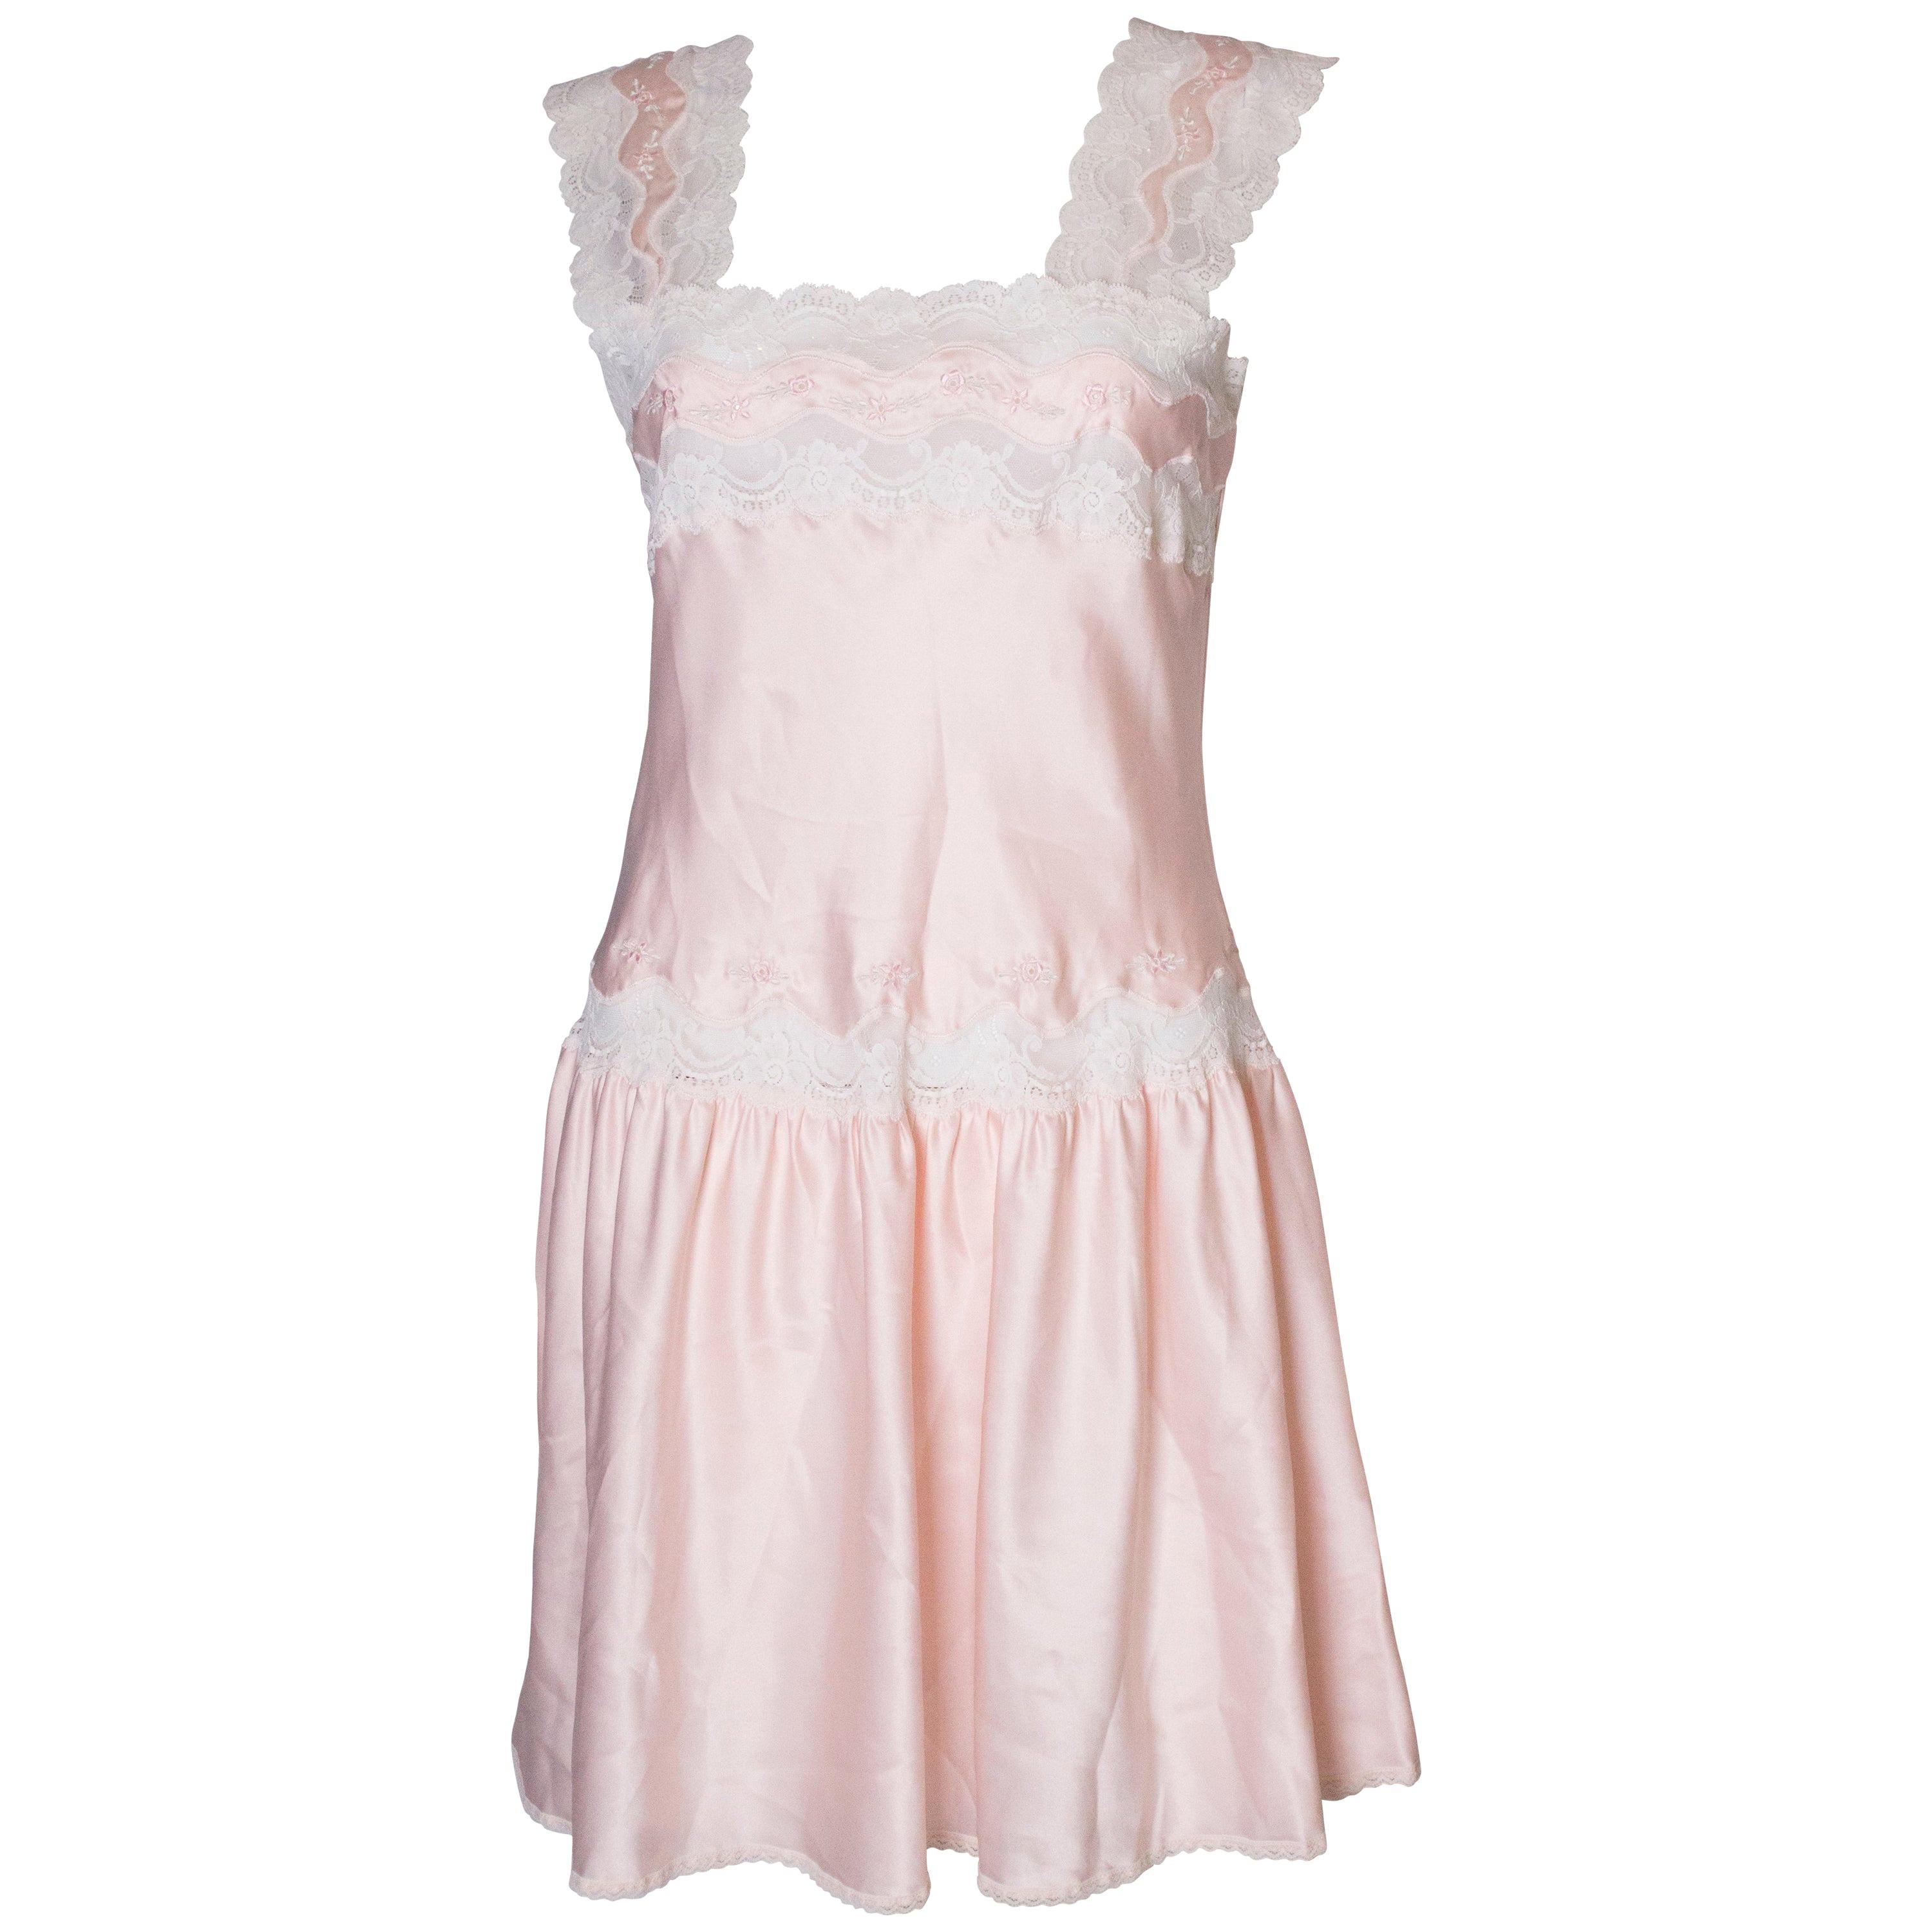 Vintage Pink Nightdress /Dress with Lace Detail